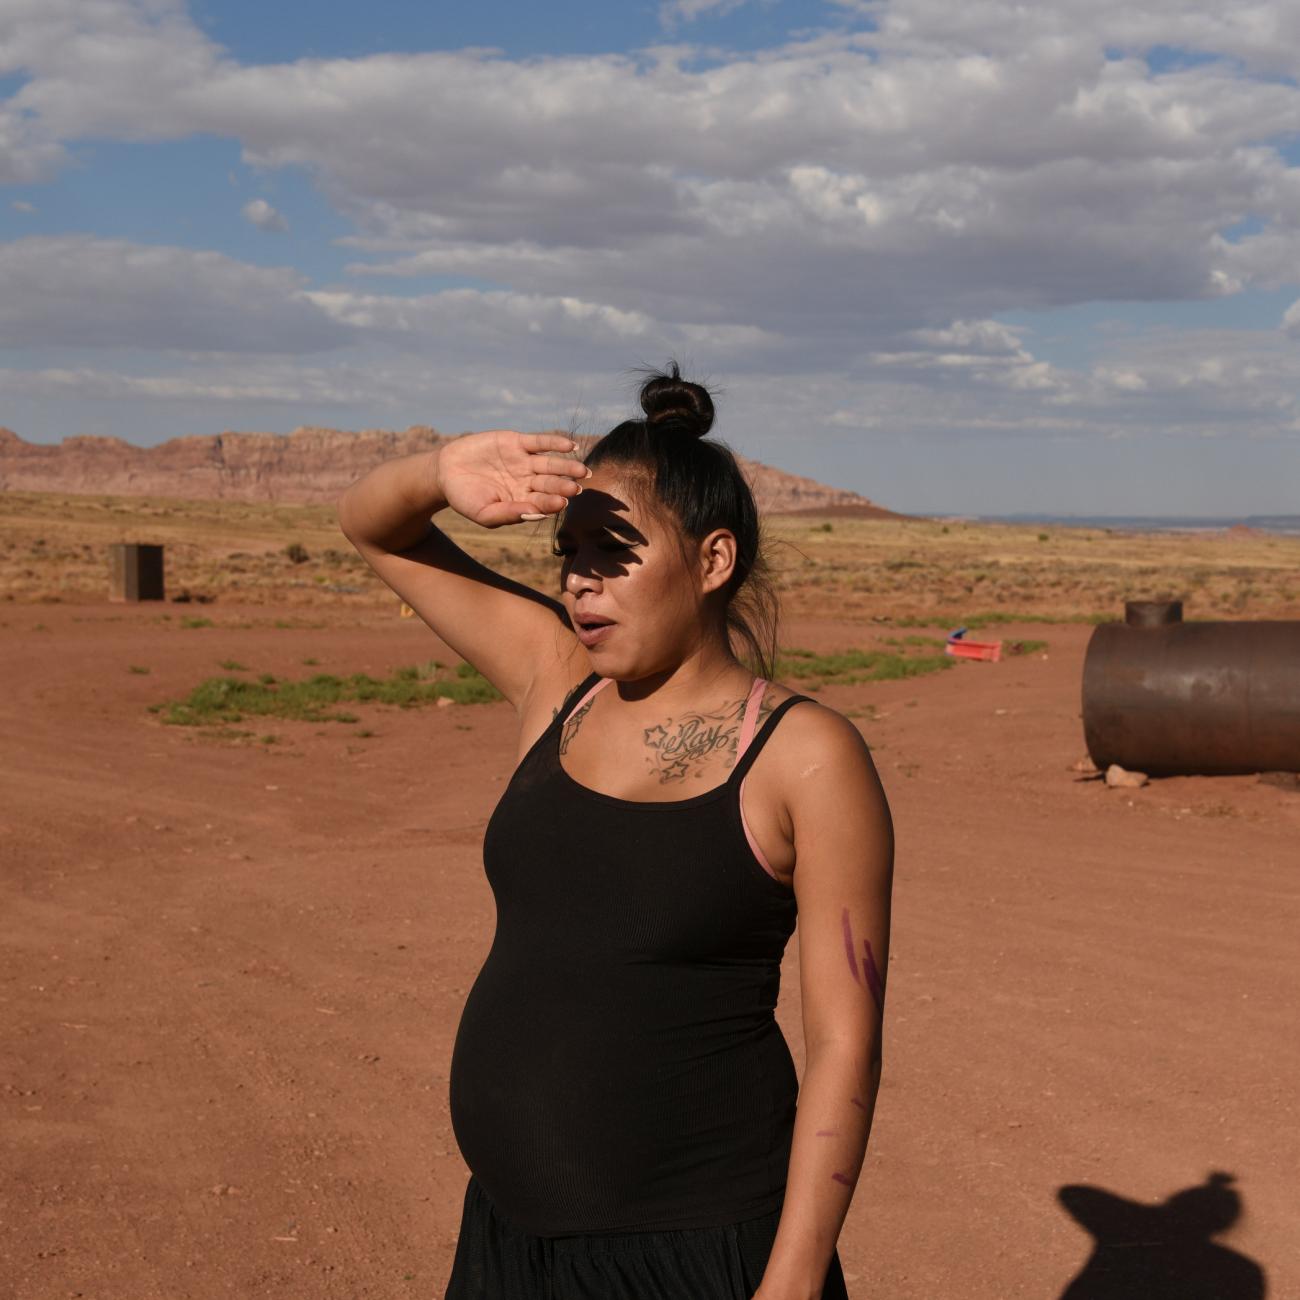 a pregnant woman from the Navajo nation wearing a black tank top shields her eyes from the sun